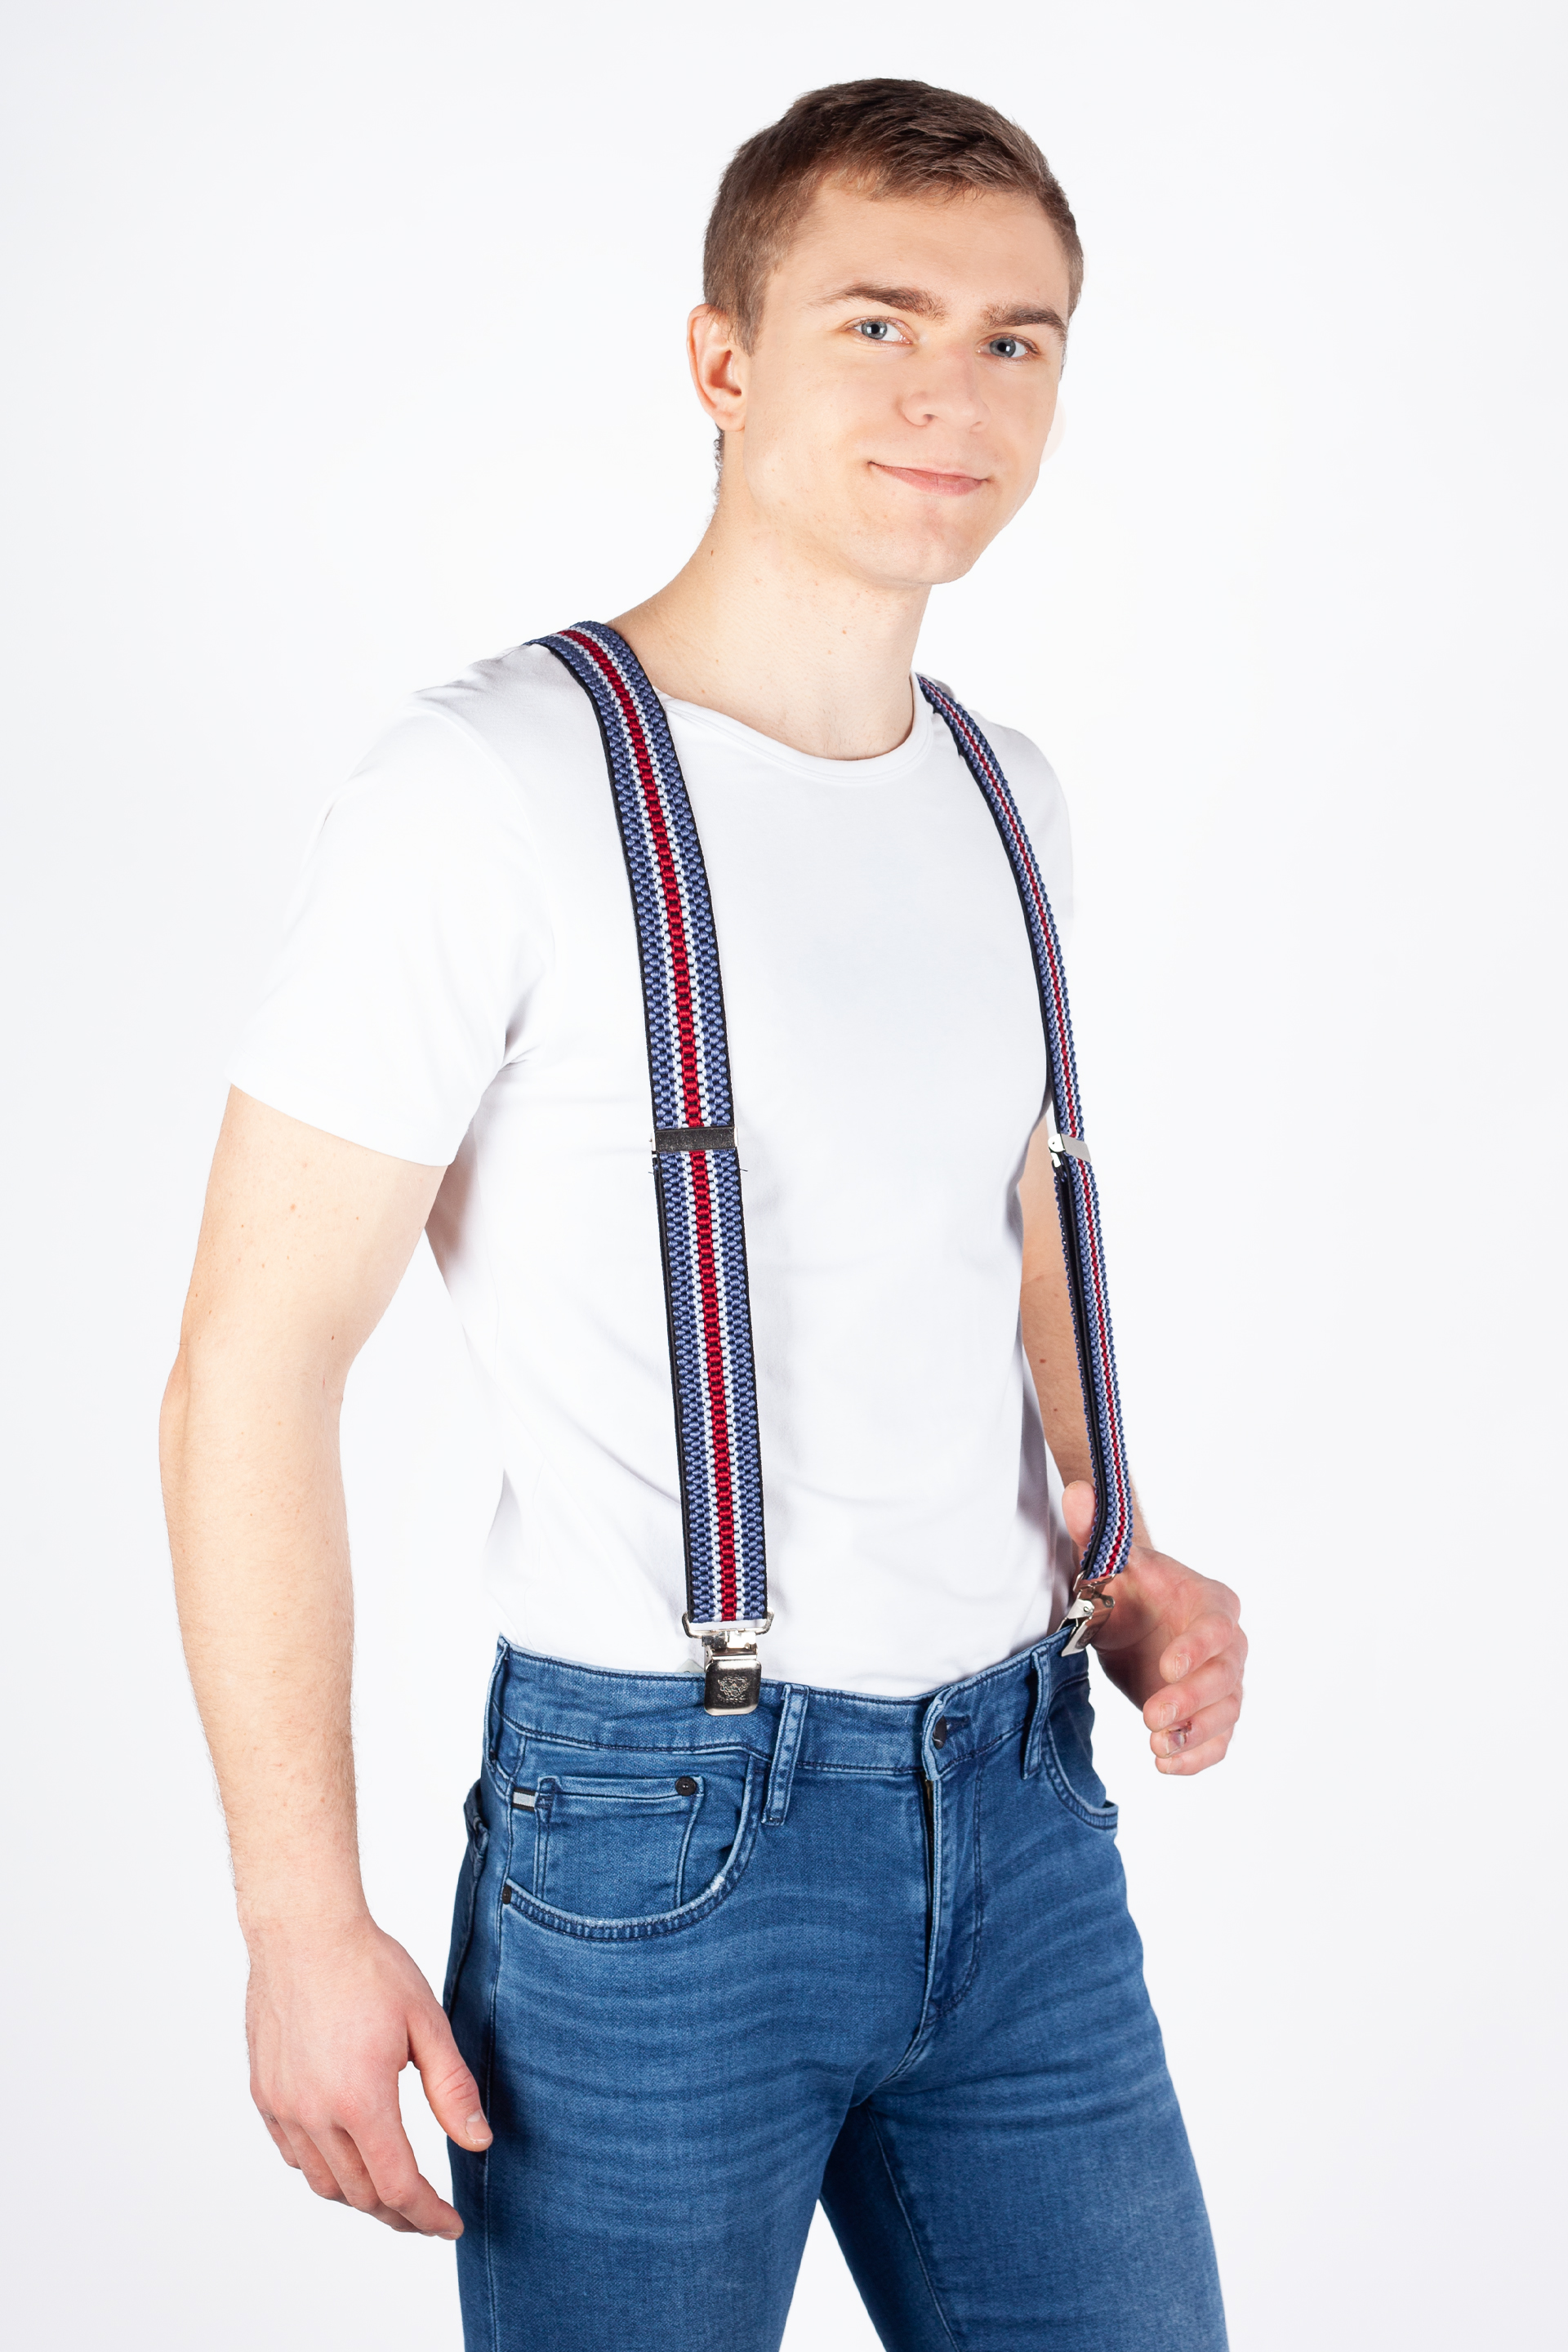 Suspenders X JEANS DMAX40-MIX-BLUE-RED